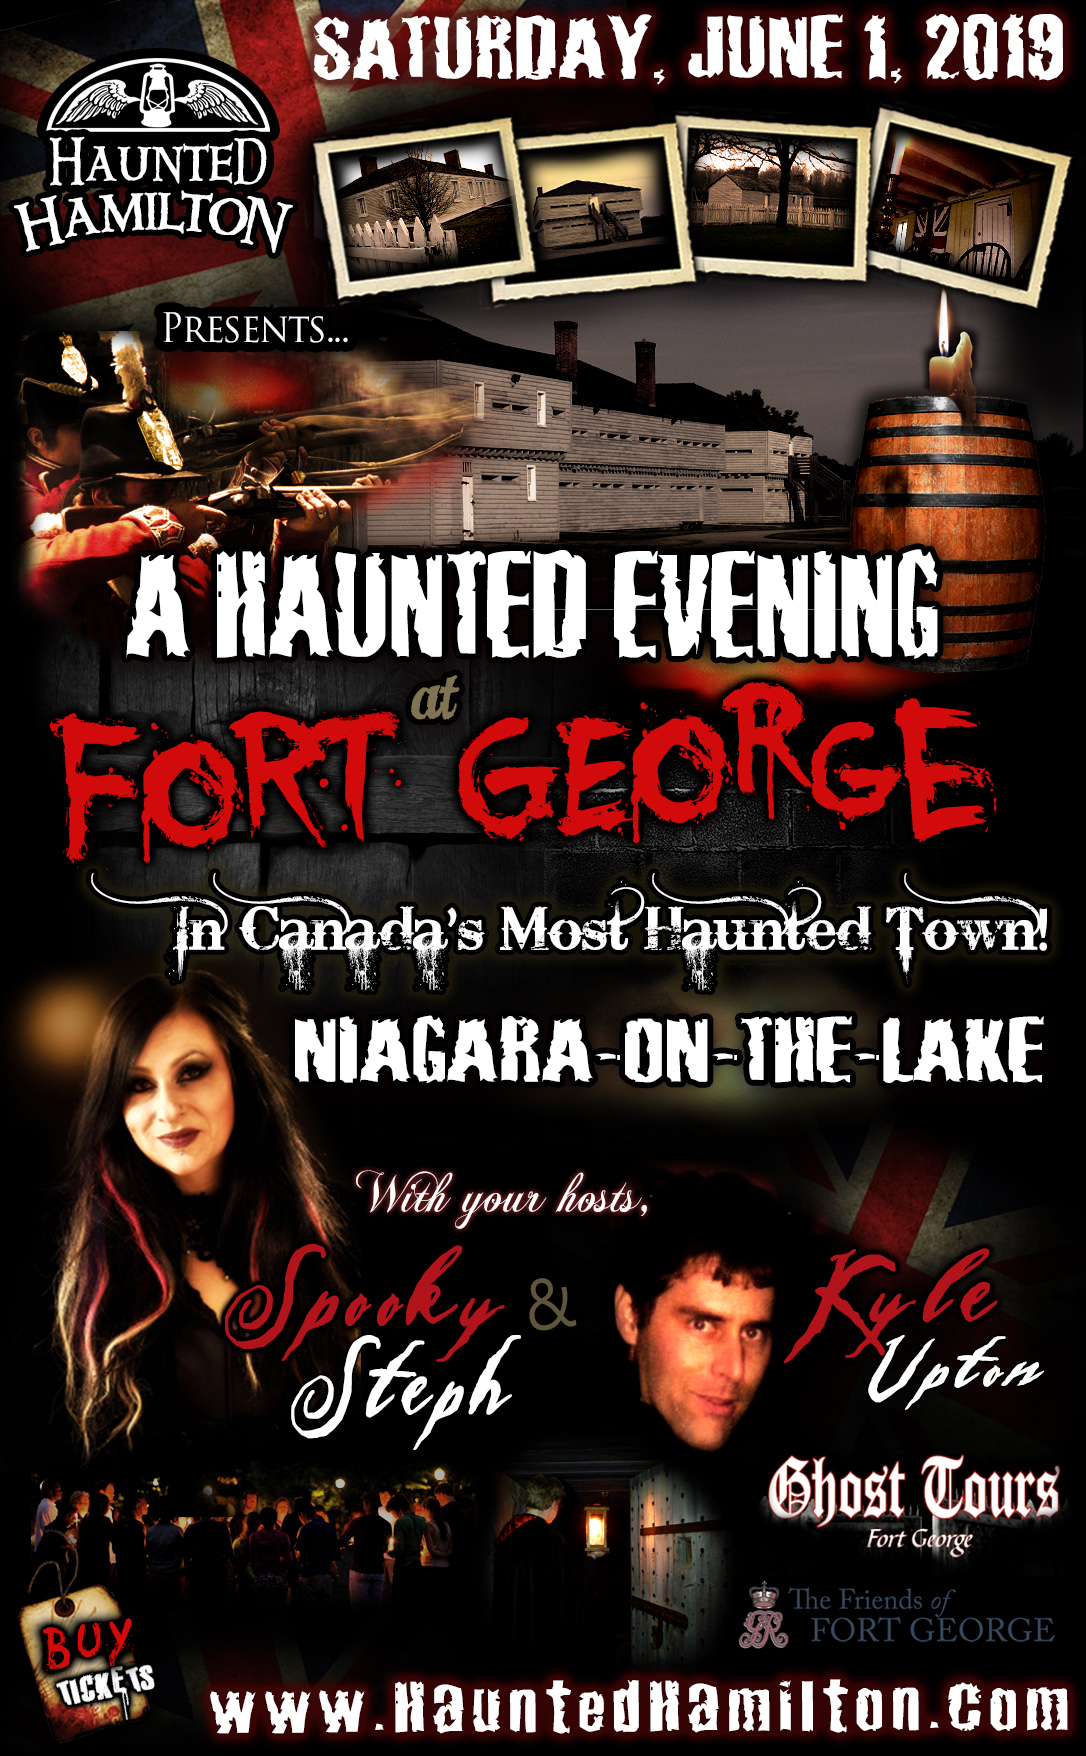 A Haunted Evening at FORT GEORGE presented by Haunted Hamilton | Canada's MOST HAUNTED Town, Niagara-on-the-Lake, Ontario, Canada